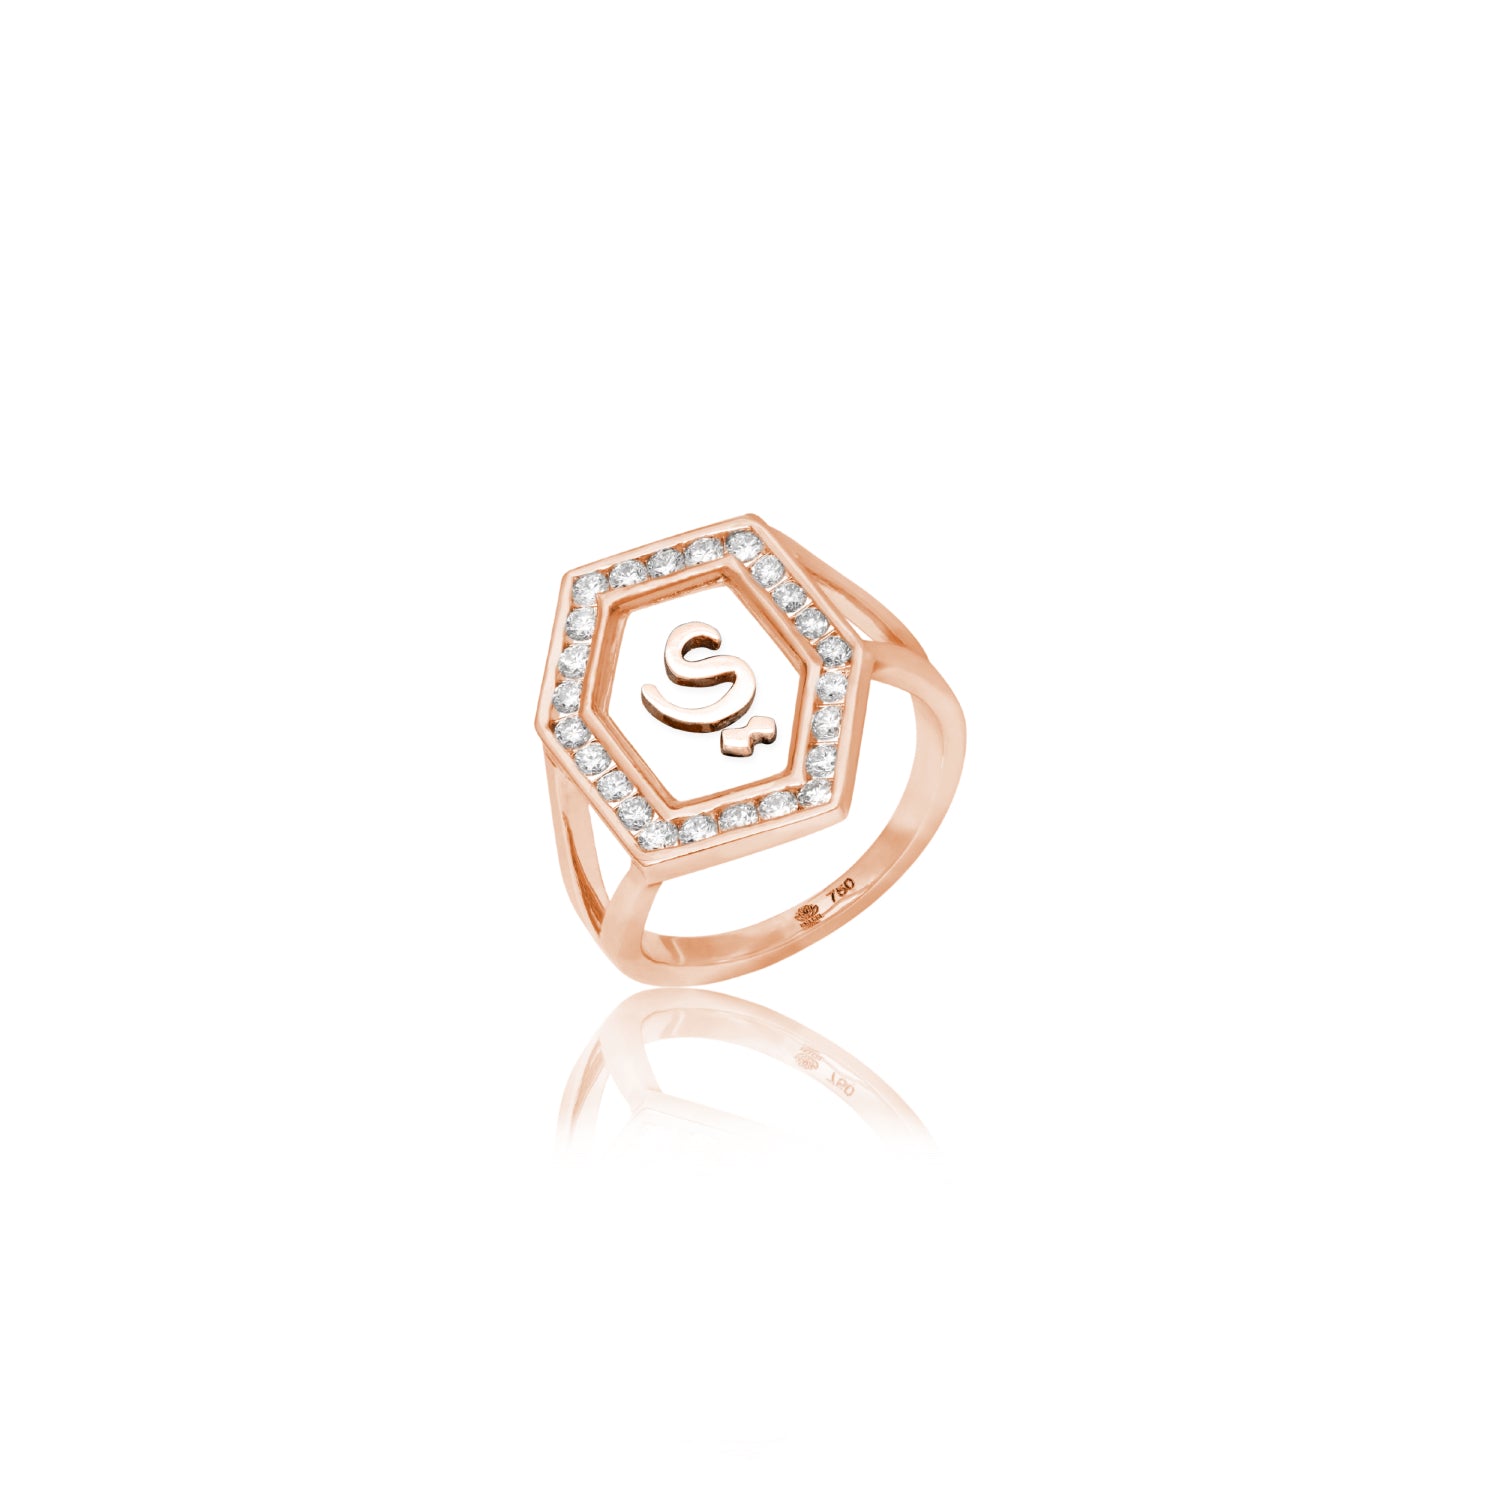 Qamoos 1.0 Letter ي Diamond Ring in Rose Gold